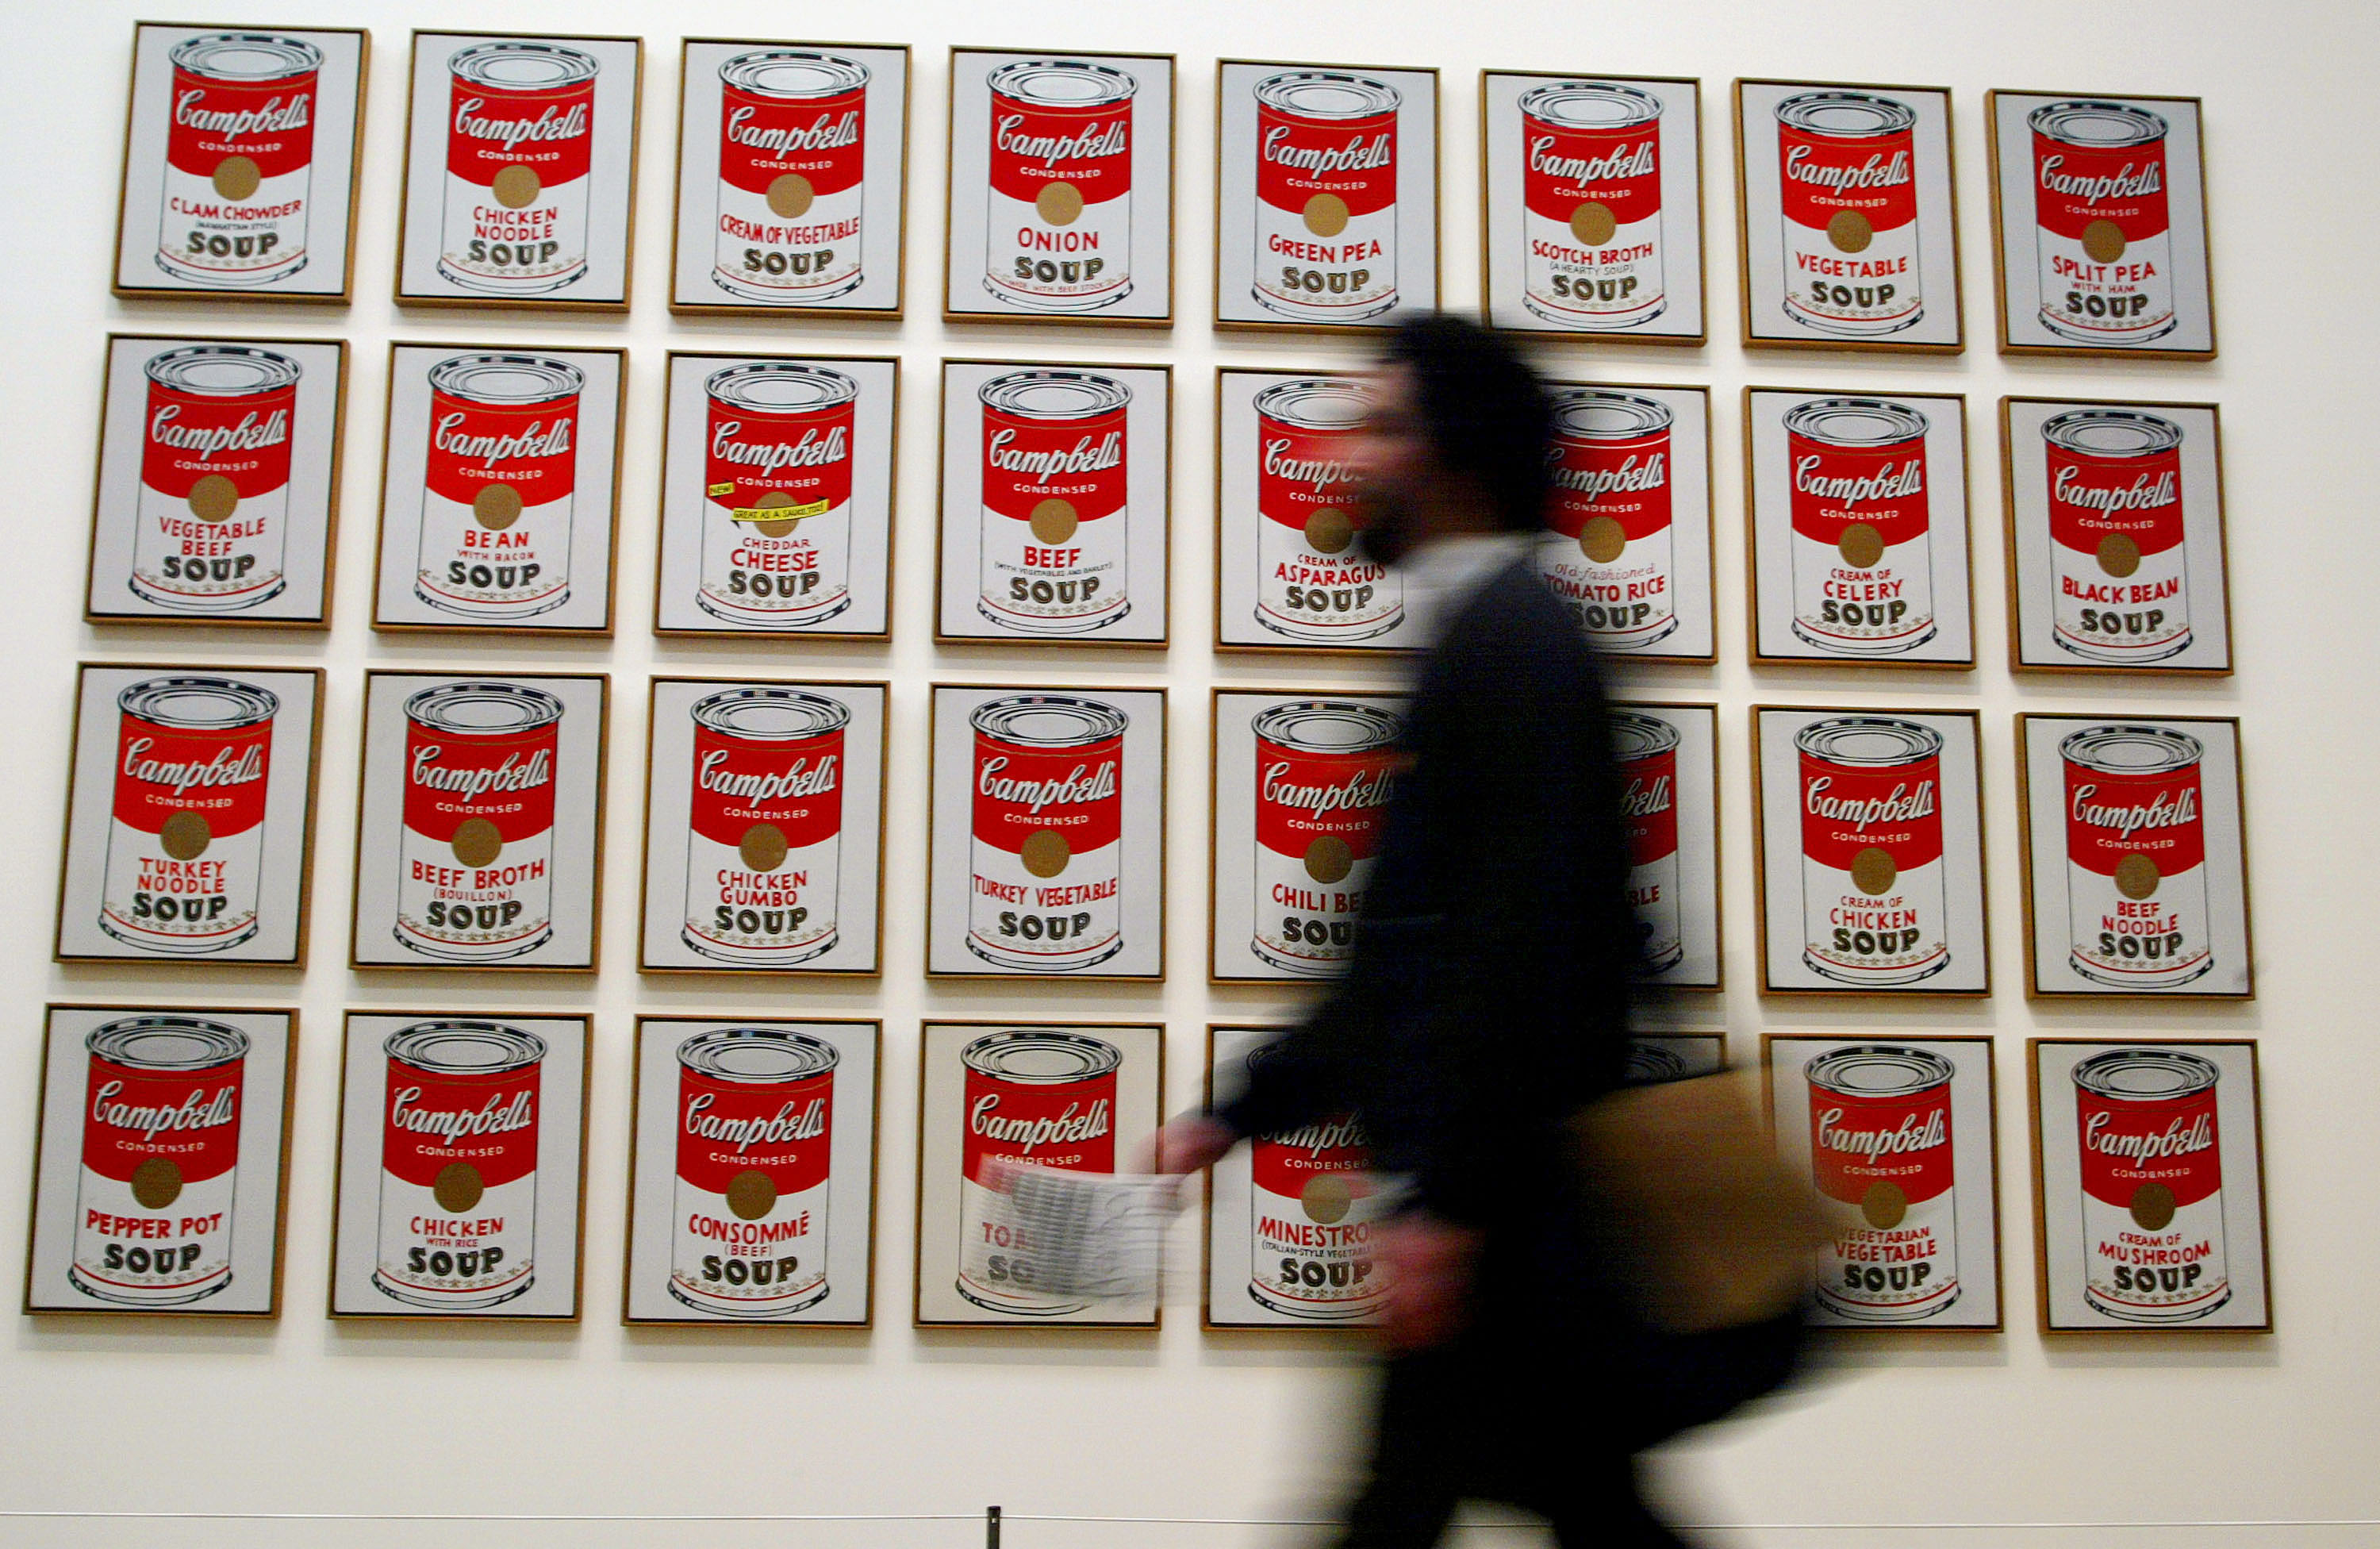 A spectator walks past "Campbells Soup Cans" created in 1962 by artist Andy Warhol at the Andy Warhol retrospective exhibition February 5, 2002 at the Tate Modern Gallery in London. (Sion Touhig—Getty Images)